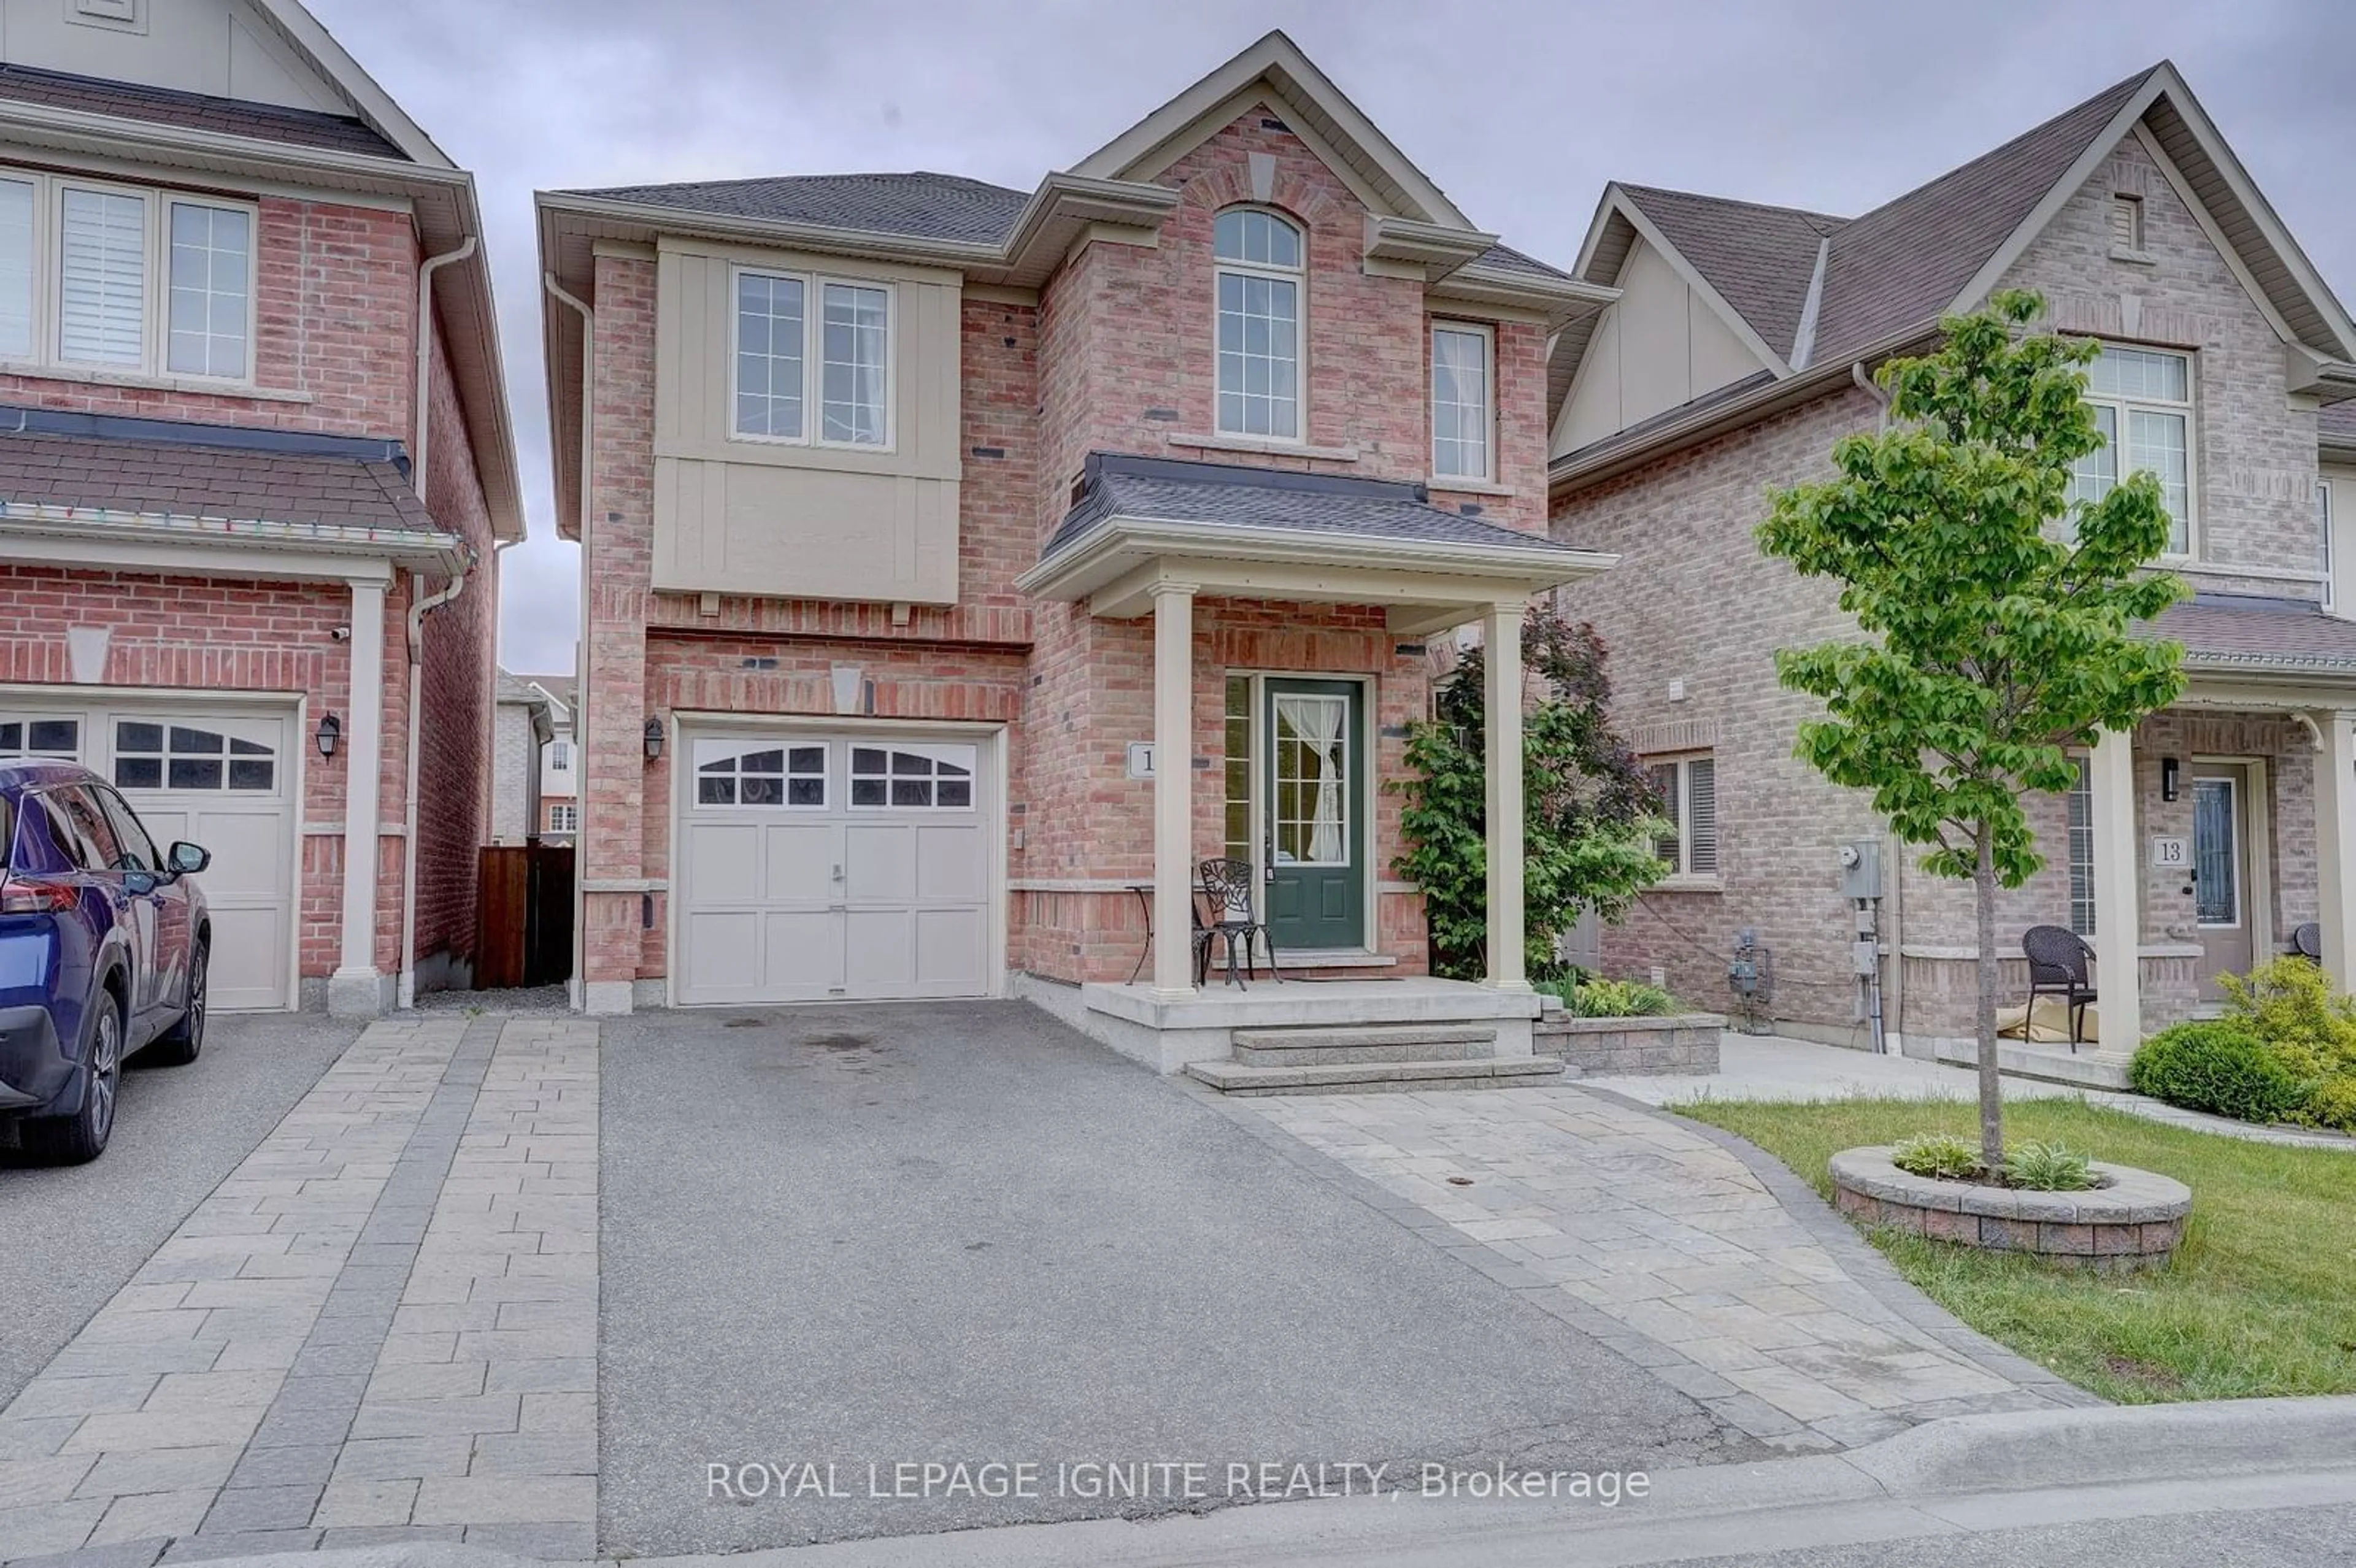 Home with brick exterior material for 15 Holroyd St, Ajax Ontario L1Z 0R7